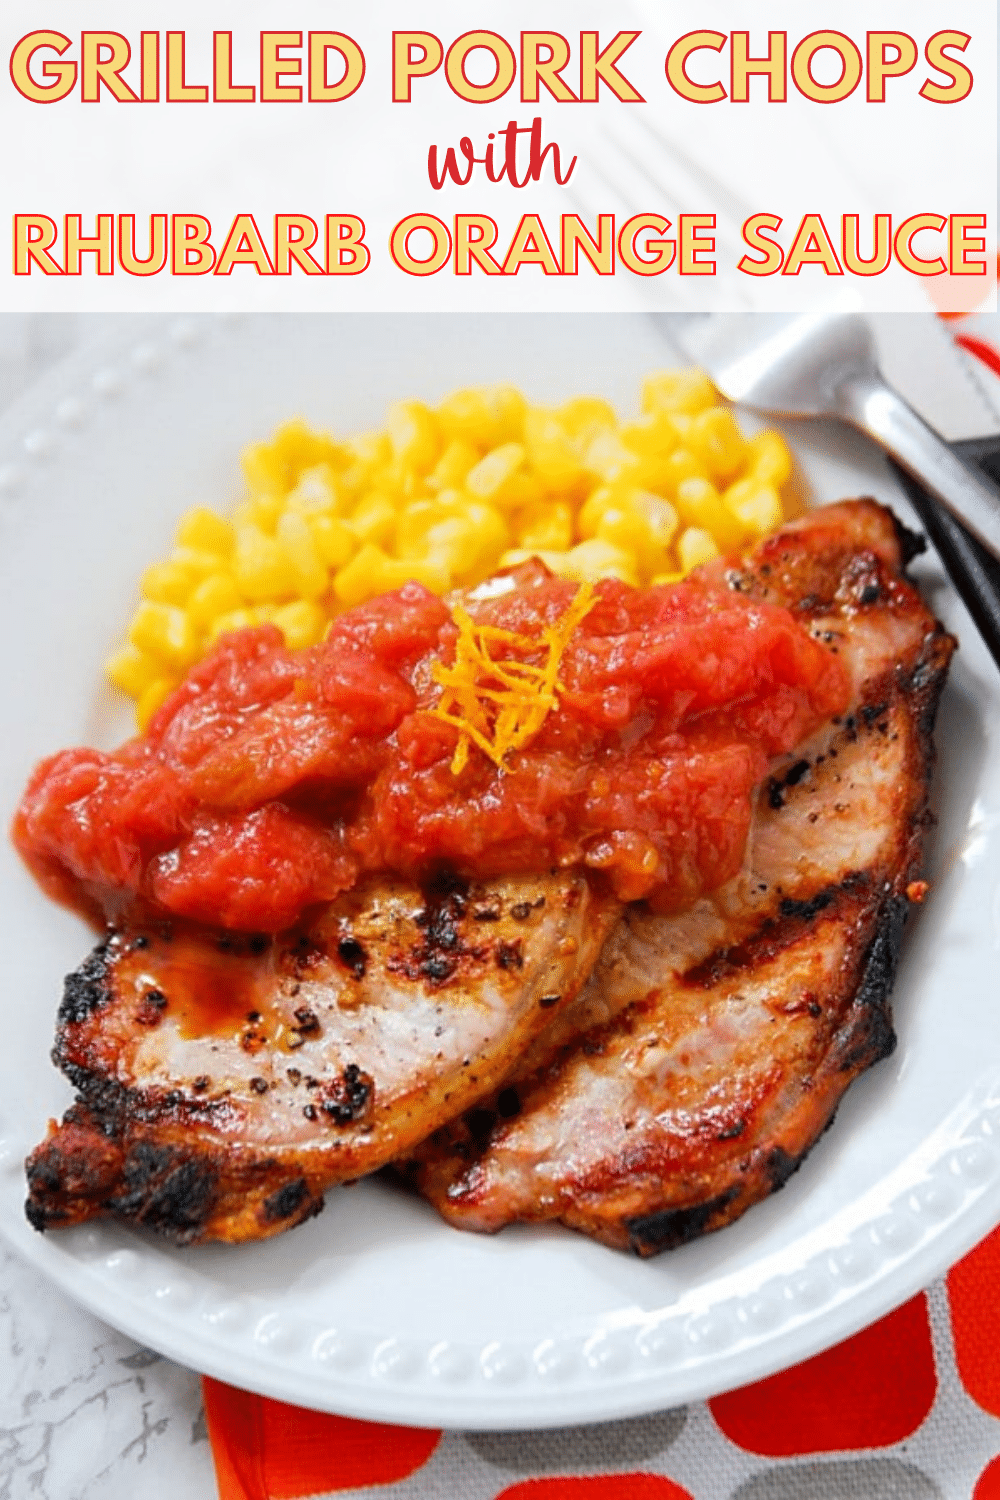 These grilled pork chops are amazing! The rhubarb orange sauce is full of flavor. Such an easy dinner, ready fast and only calls for a few ingredients. #easydinner #porkchops #rhubarb #grillrecipe via @wondermomwannab